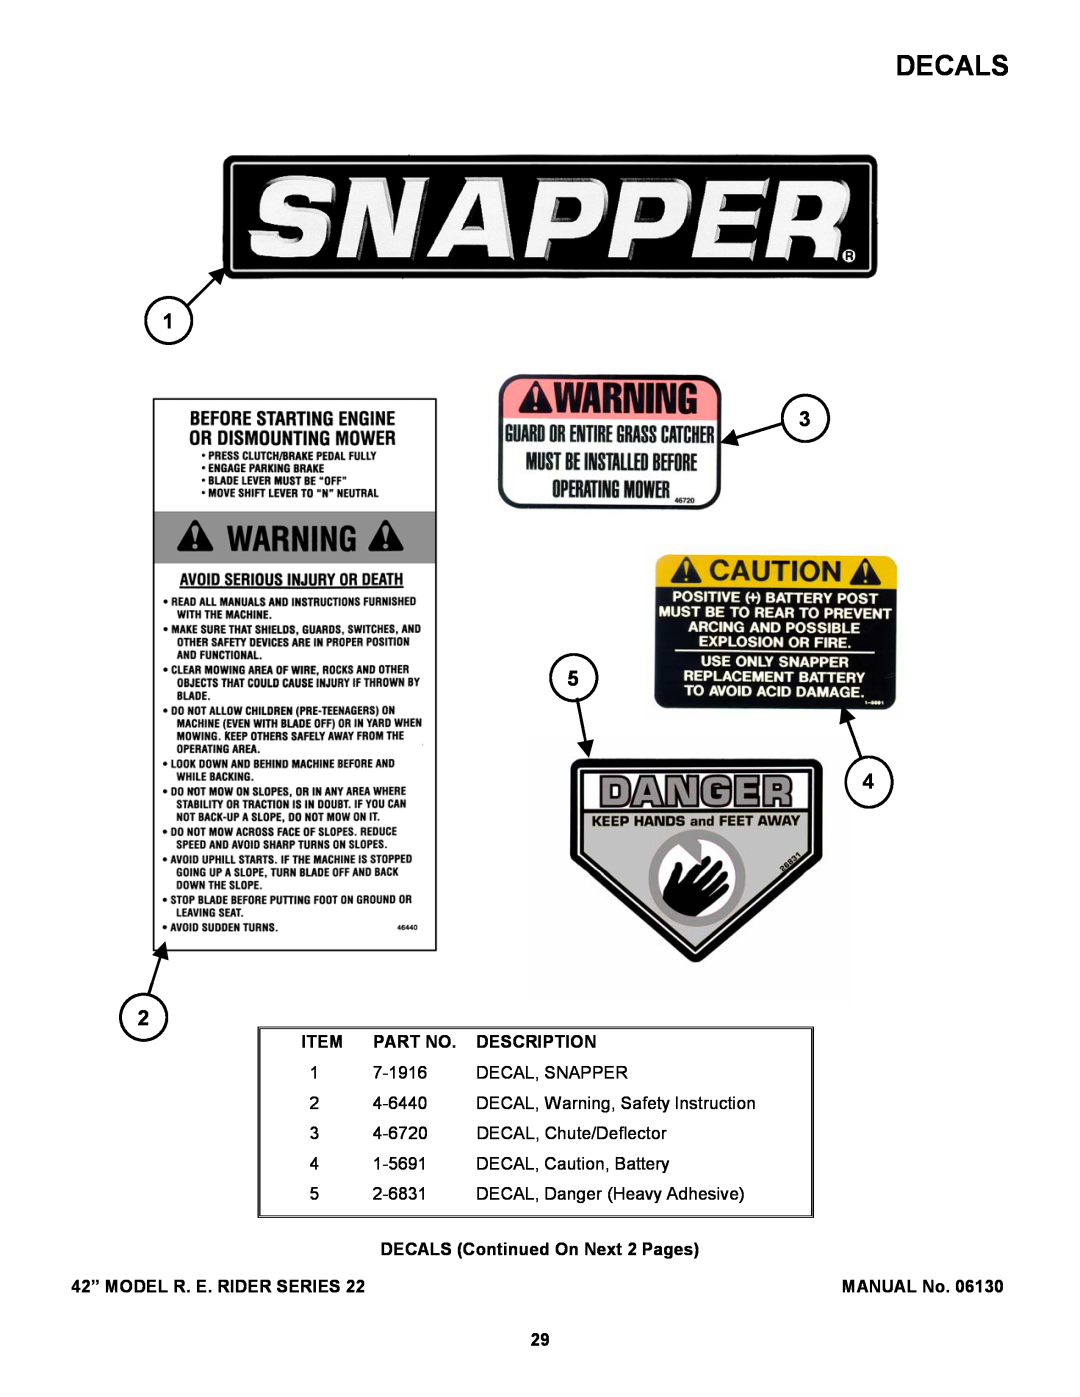 Snapper 421622BVE manual Decals, DECALS Continued On Next 2 Pages, Description, 42” MODEL R. E. RIDER SERIES, MANUAL No 